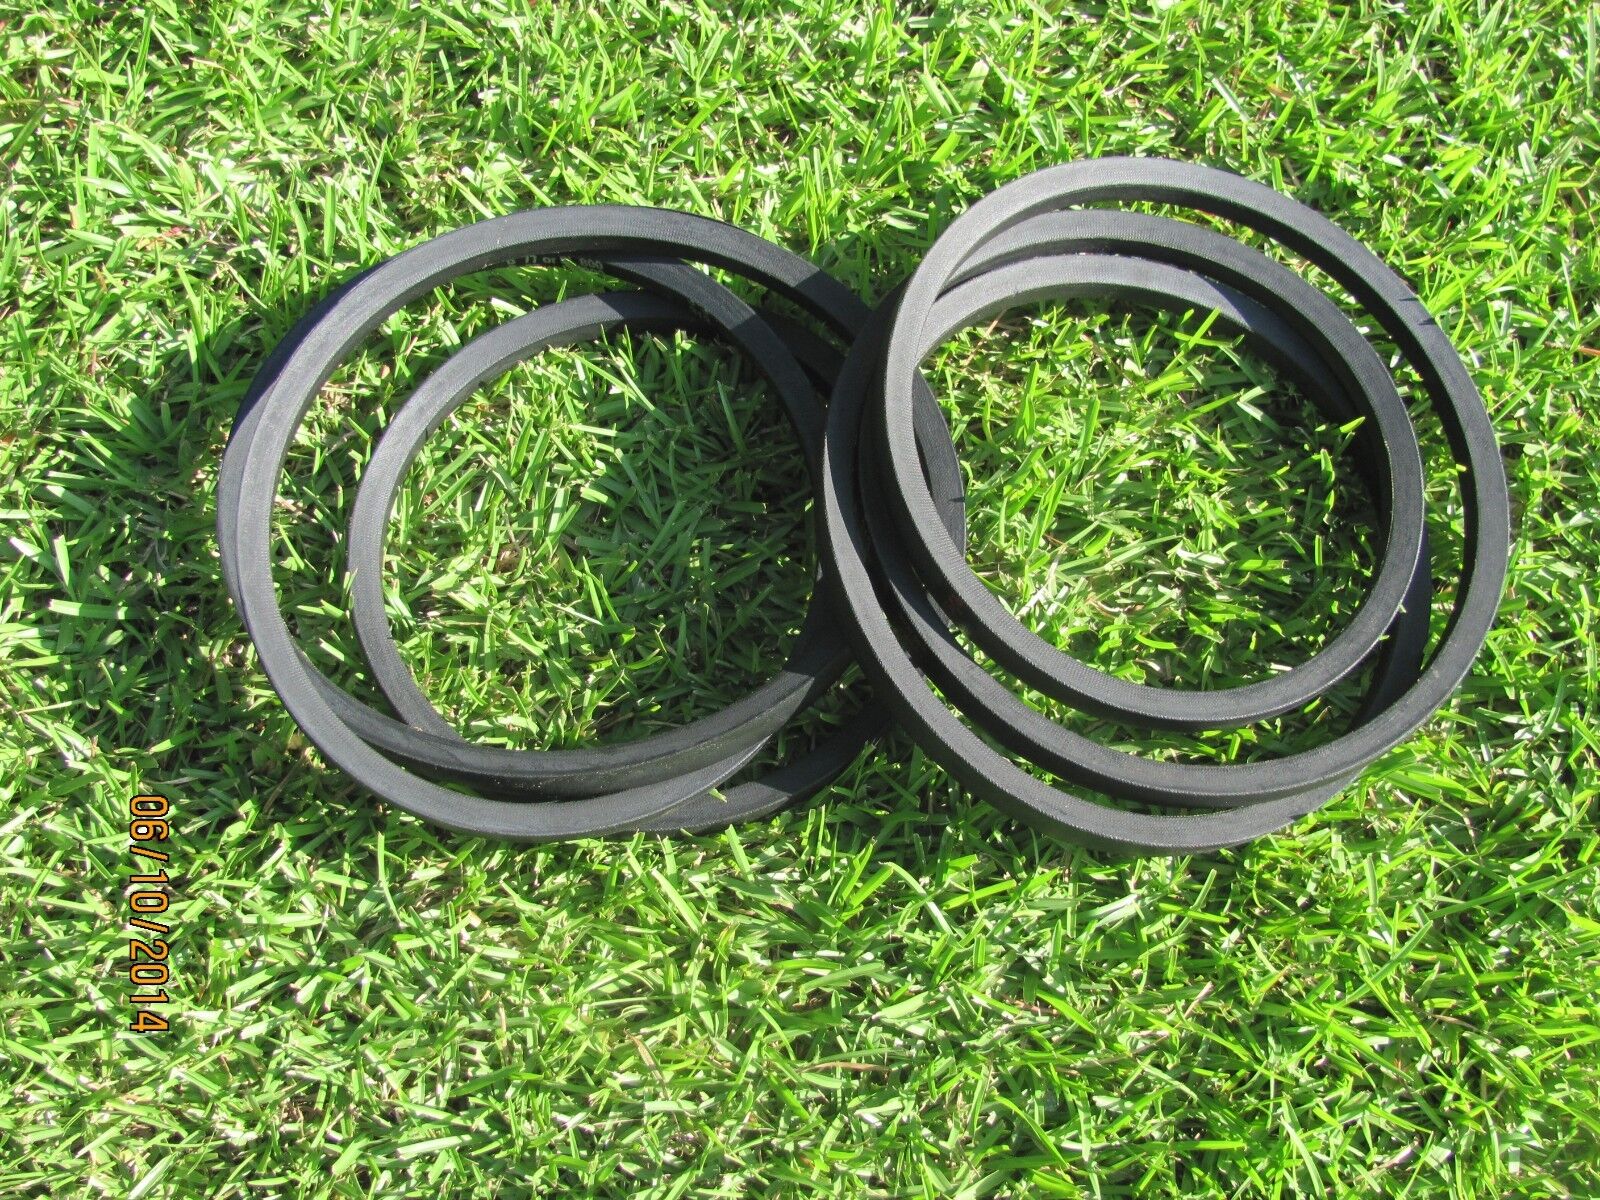 2 REPLACEMENT BELTS FOR SERVIS RHINO BREEZE 72" MOWER RHINO 00775060 775060